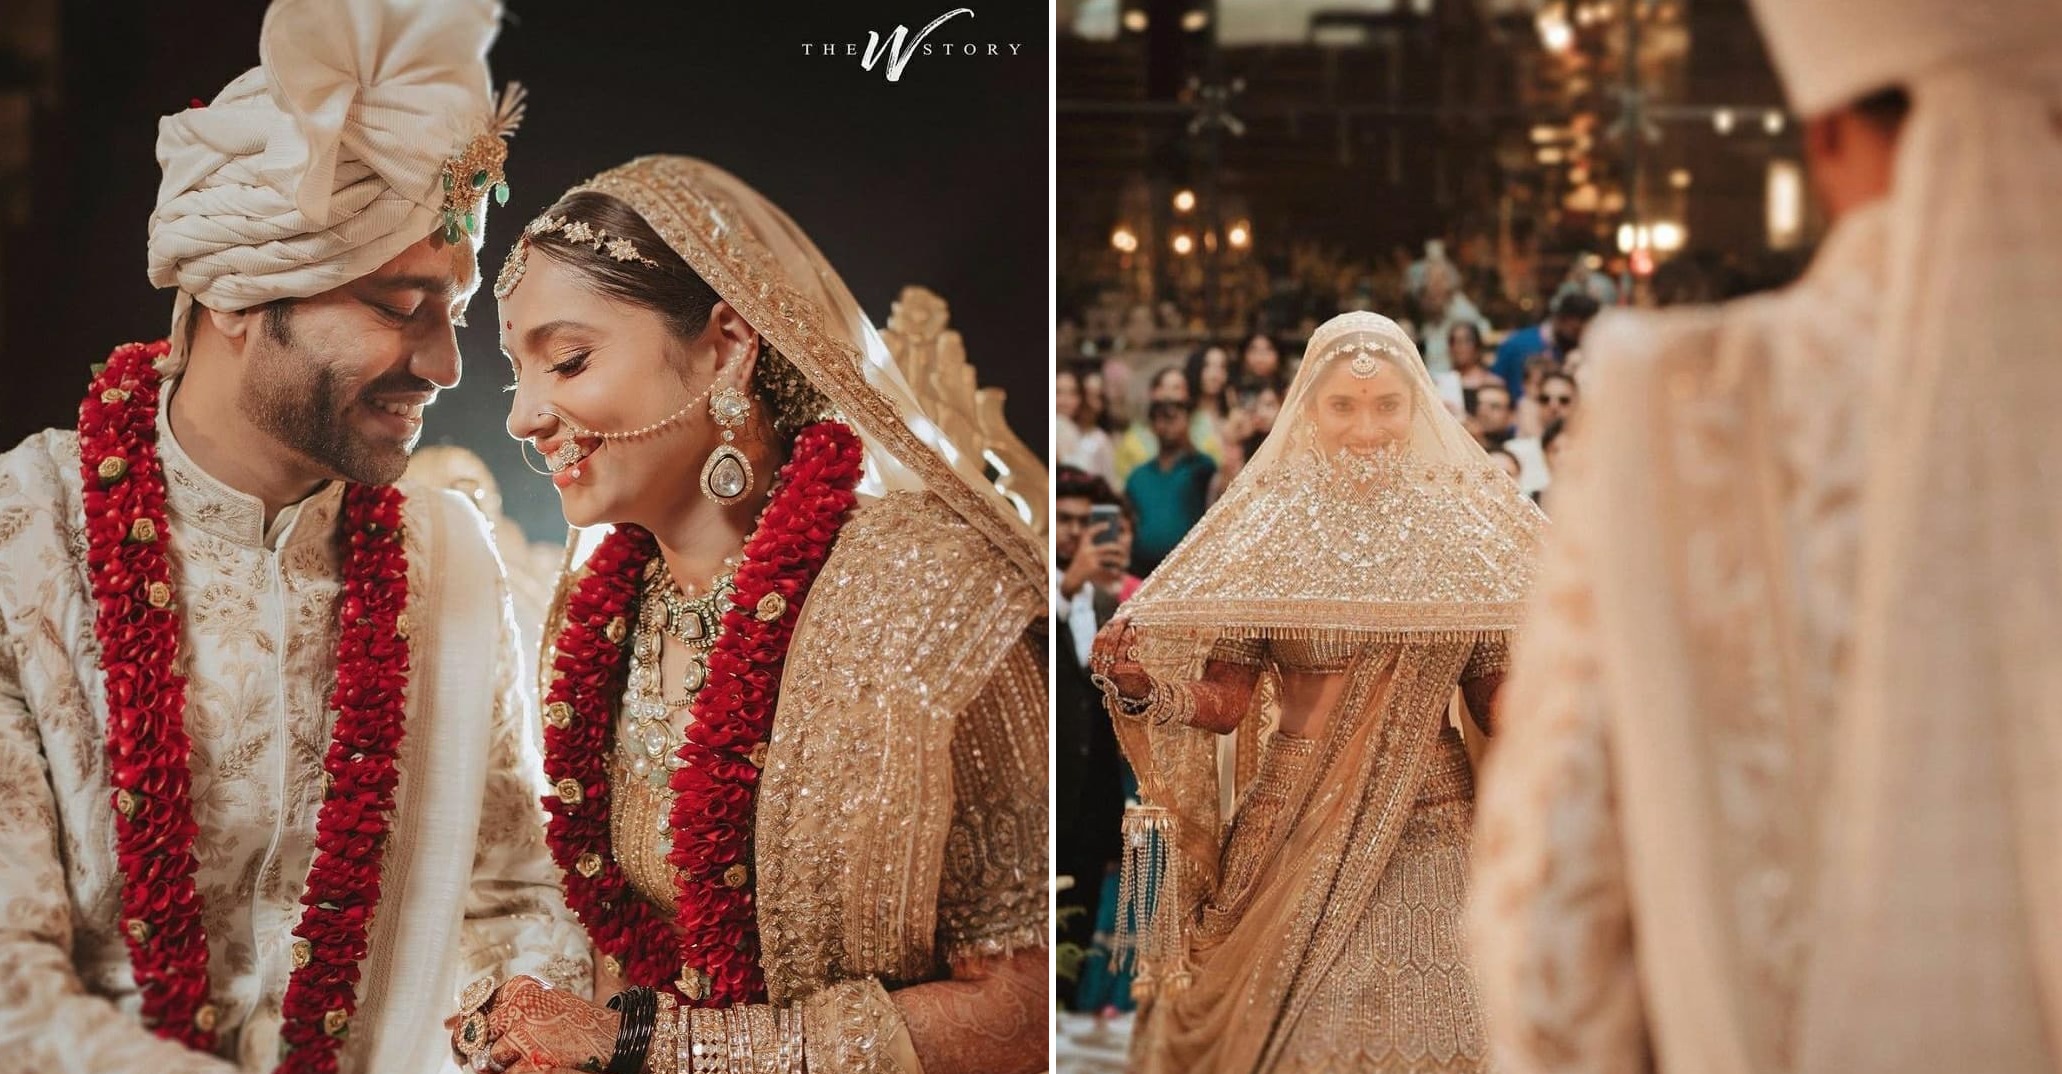 Ankita Lokhande Marries Vicky Jain In Lavish Ceremony: See All Pictures From Their Beautiful Celebration